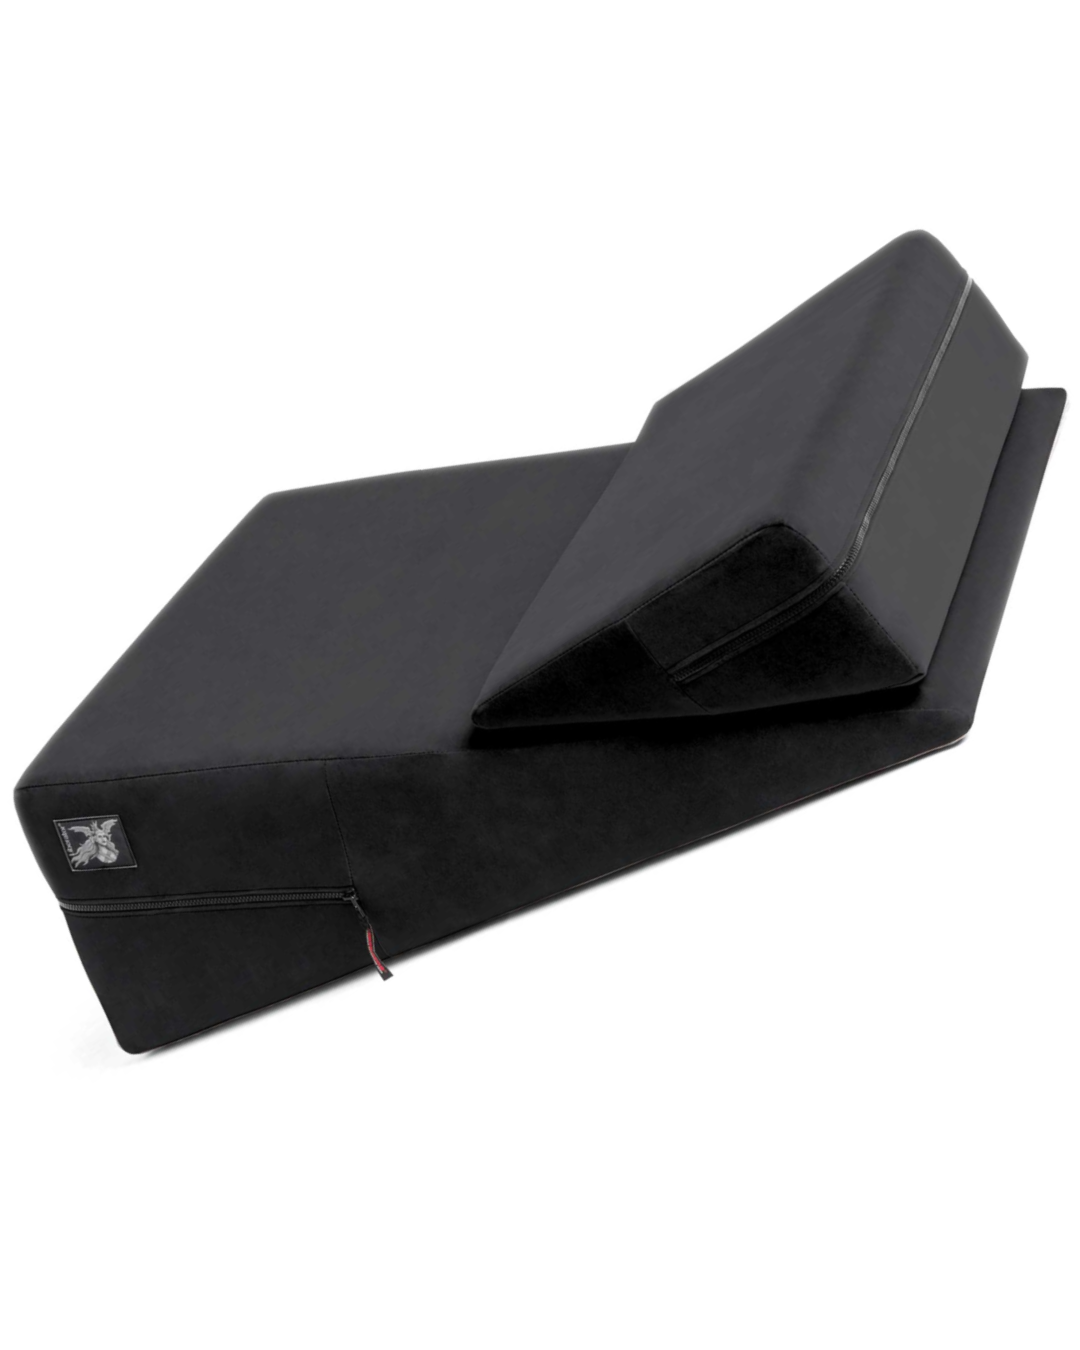 Liberator Wedge and Ramp Combo Sex Positioning Cushions - Assorted Colors